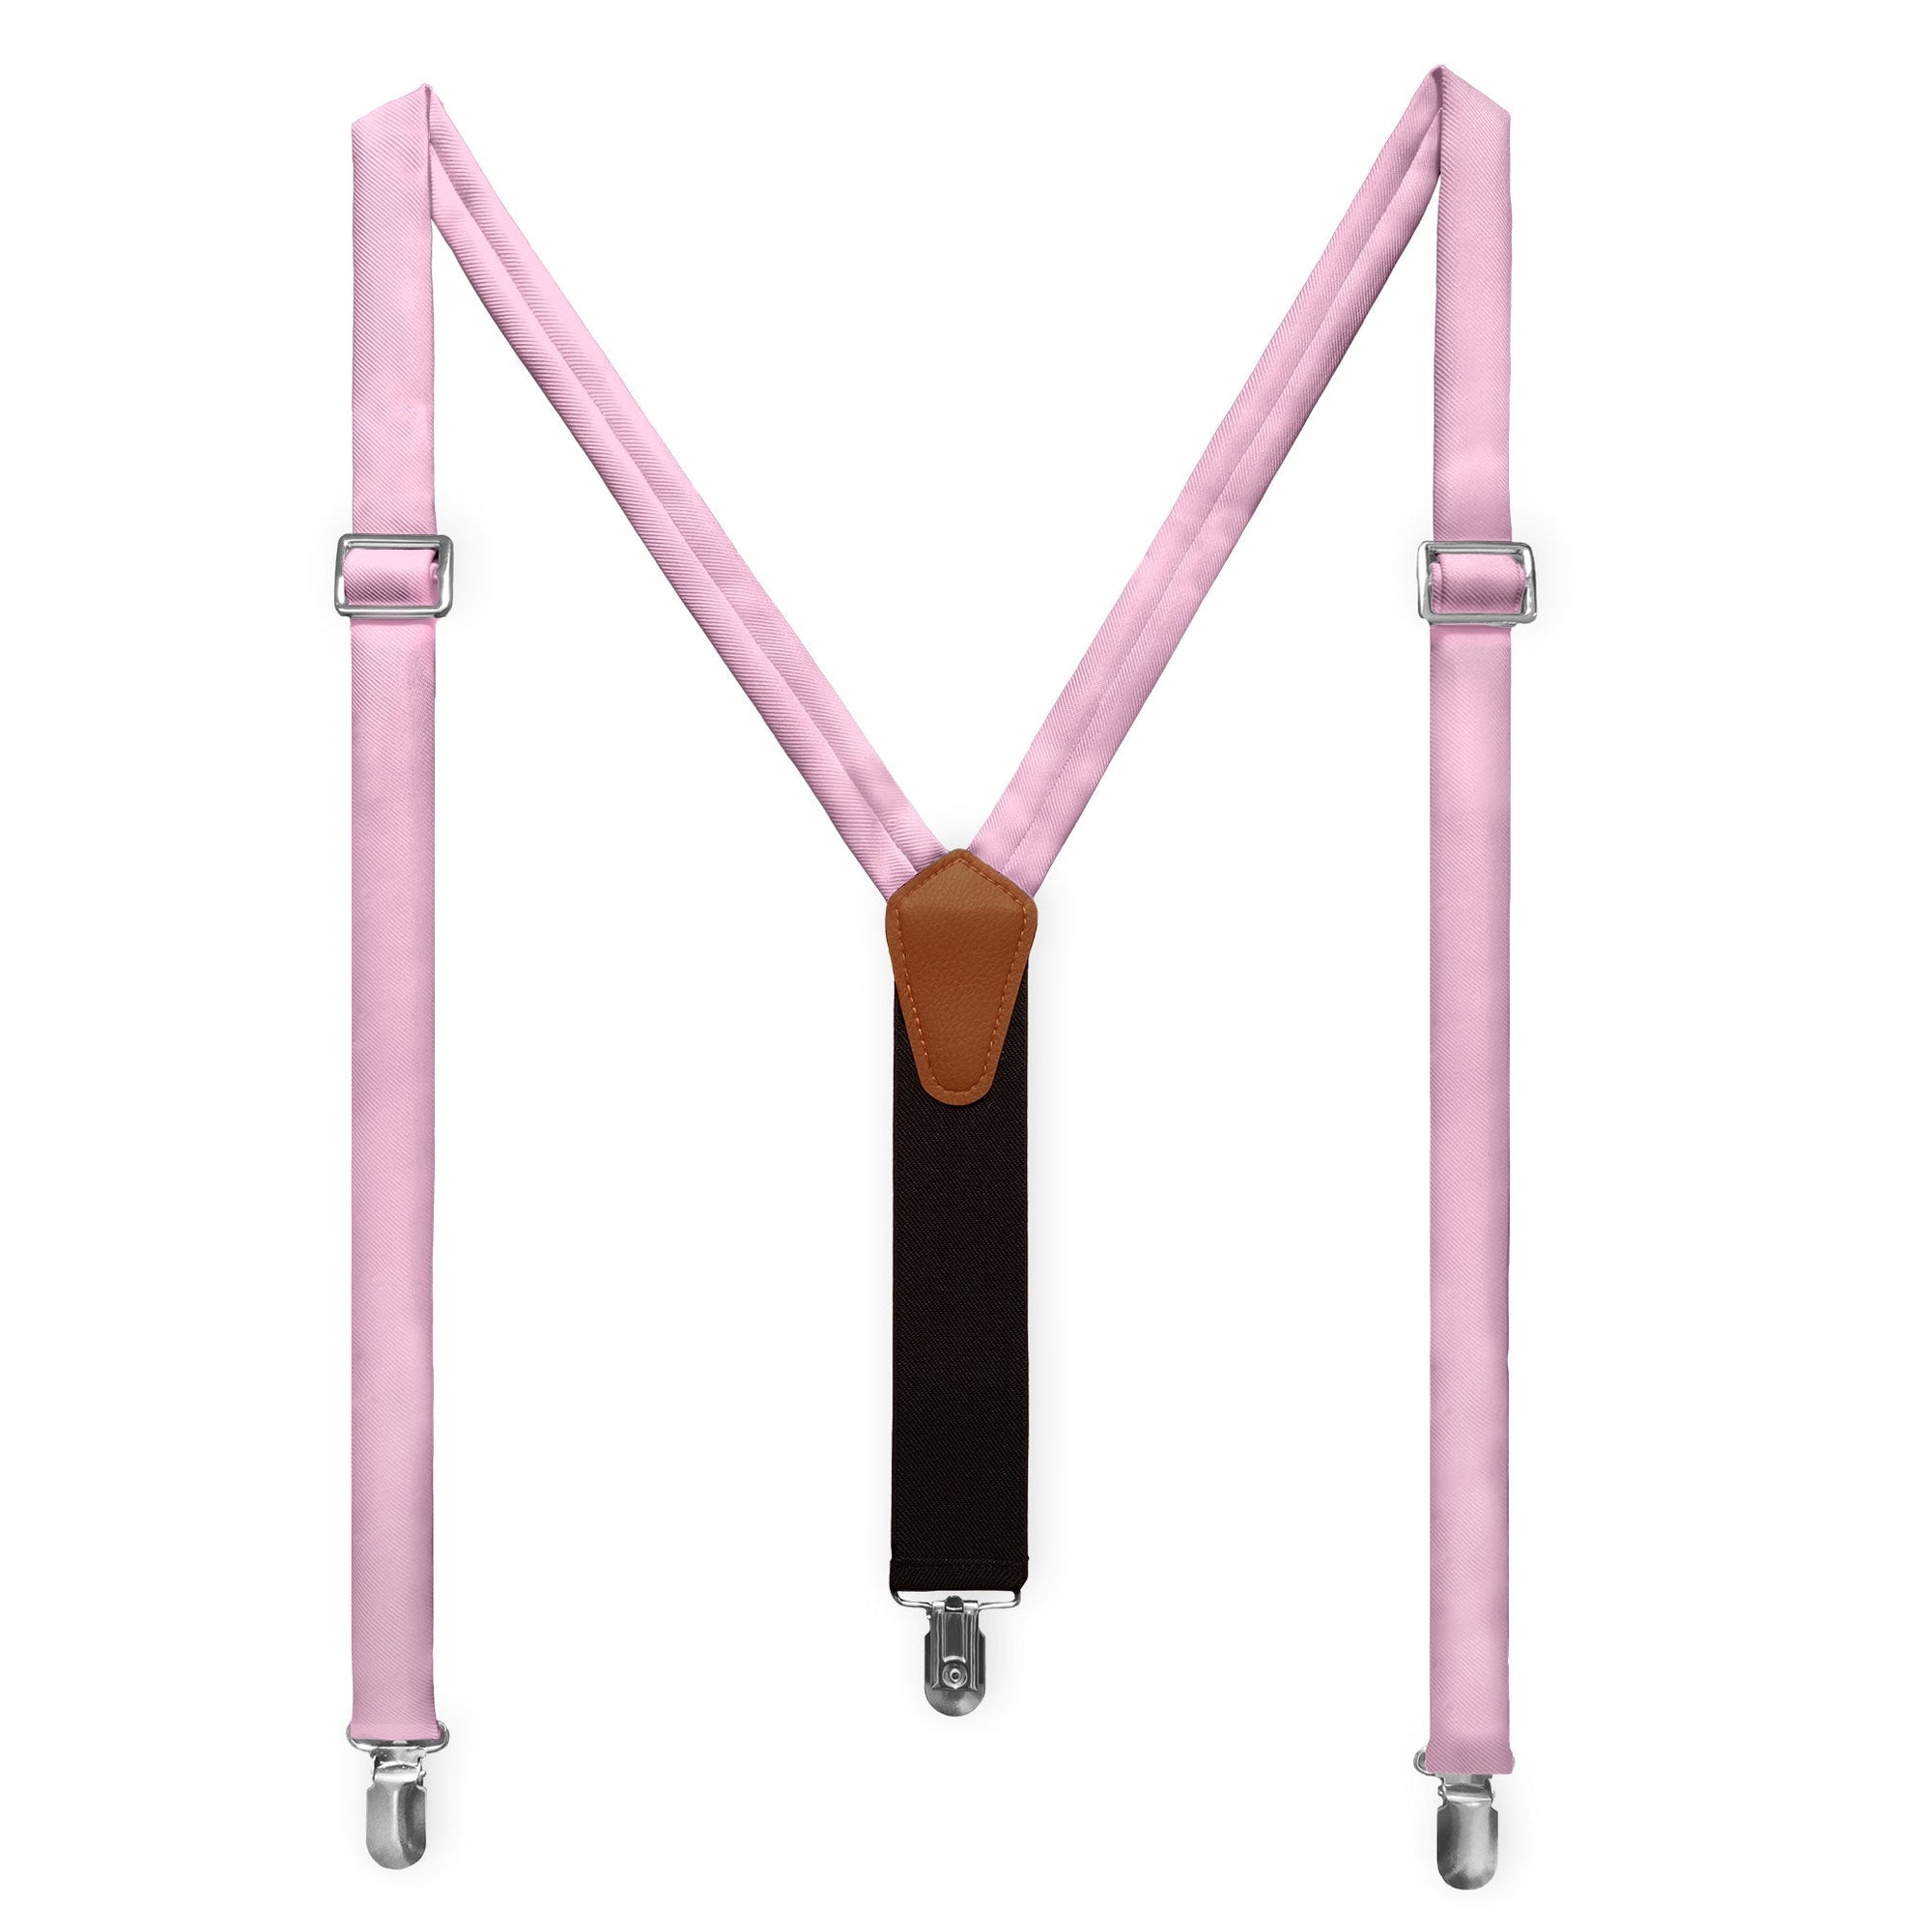 Azazie Candy Pink Suspenders - Adult Short 36-40" -  - Knotty Tie Co.